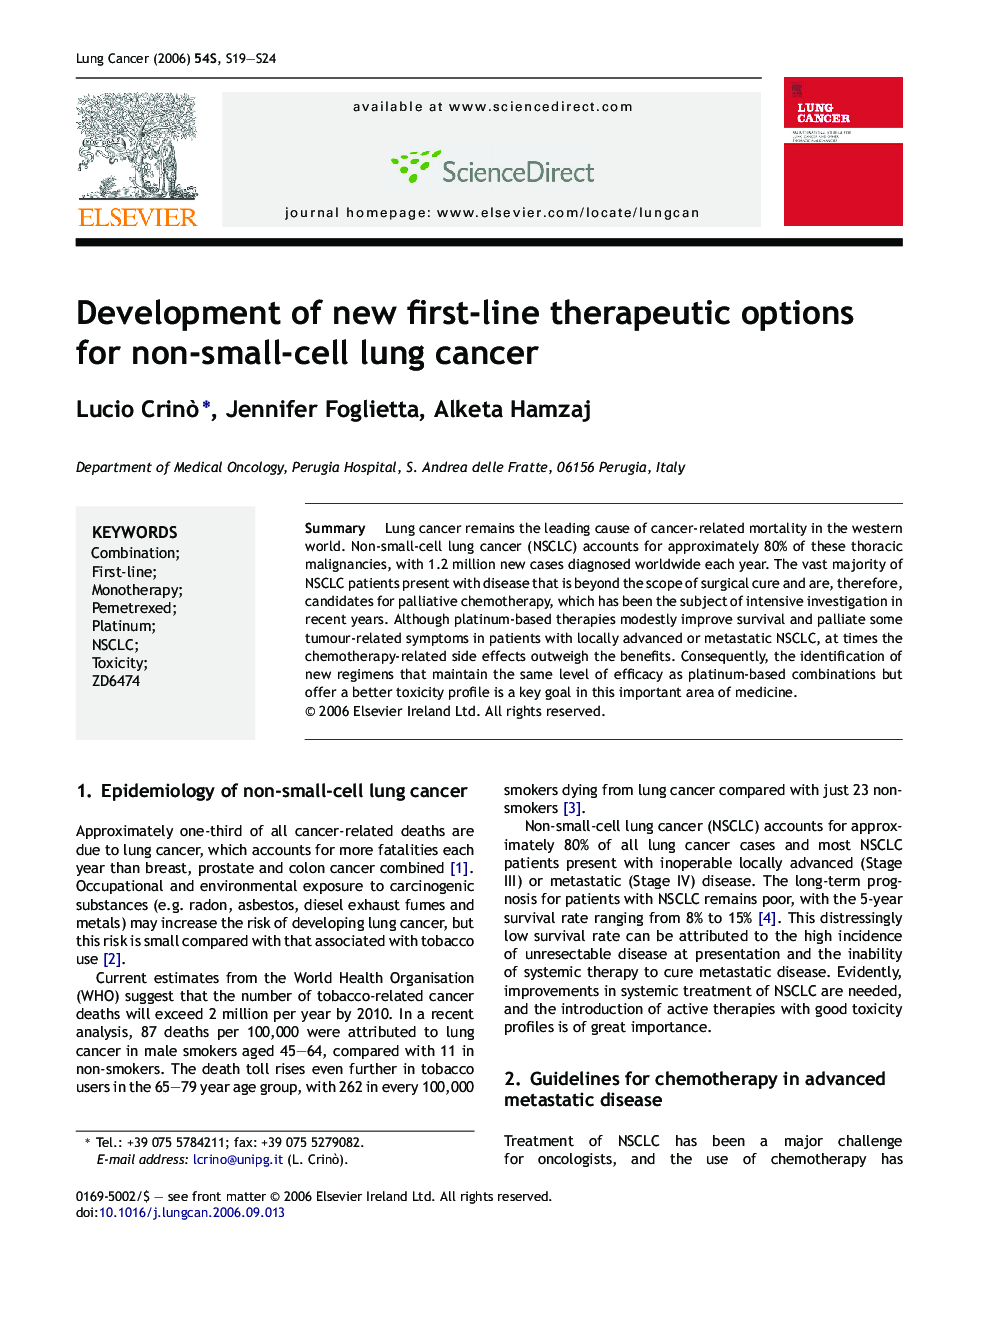 Development of new first-line therapeutic options for non-small-cell lung cancer